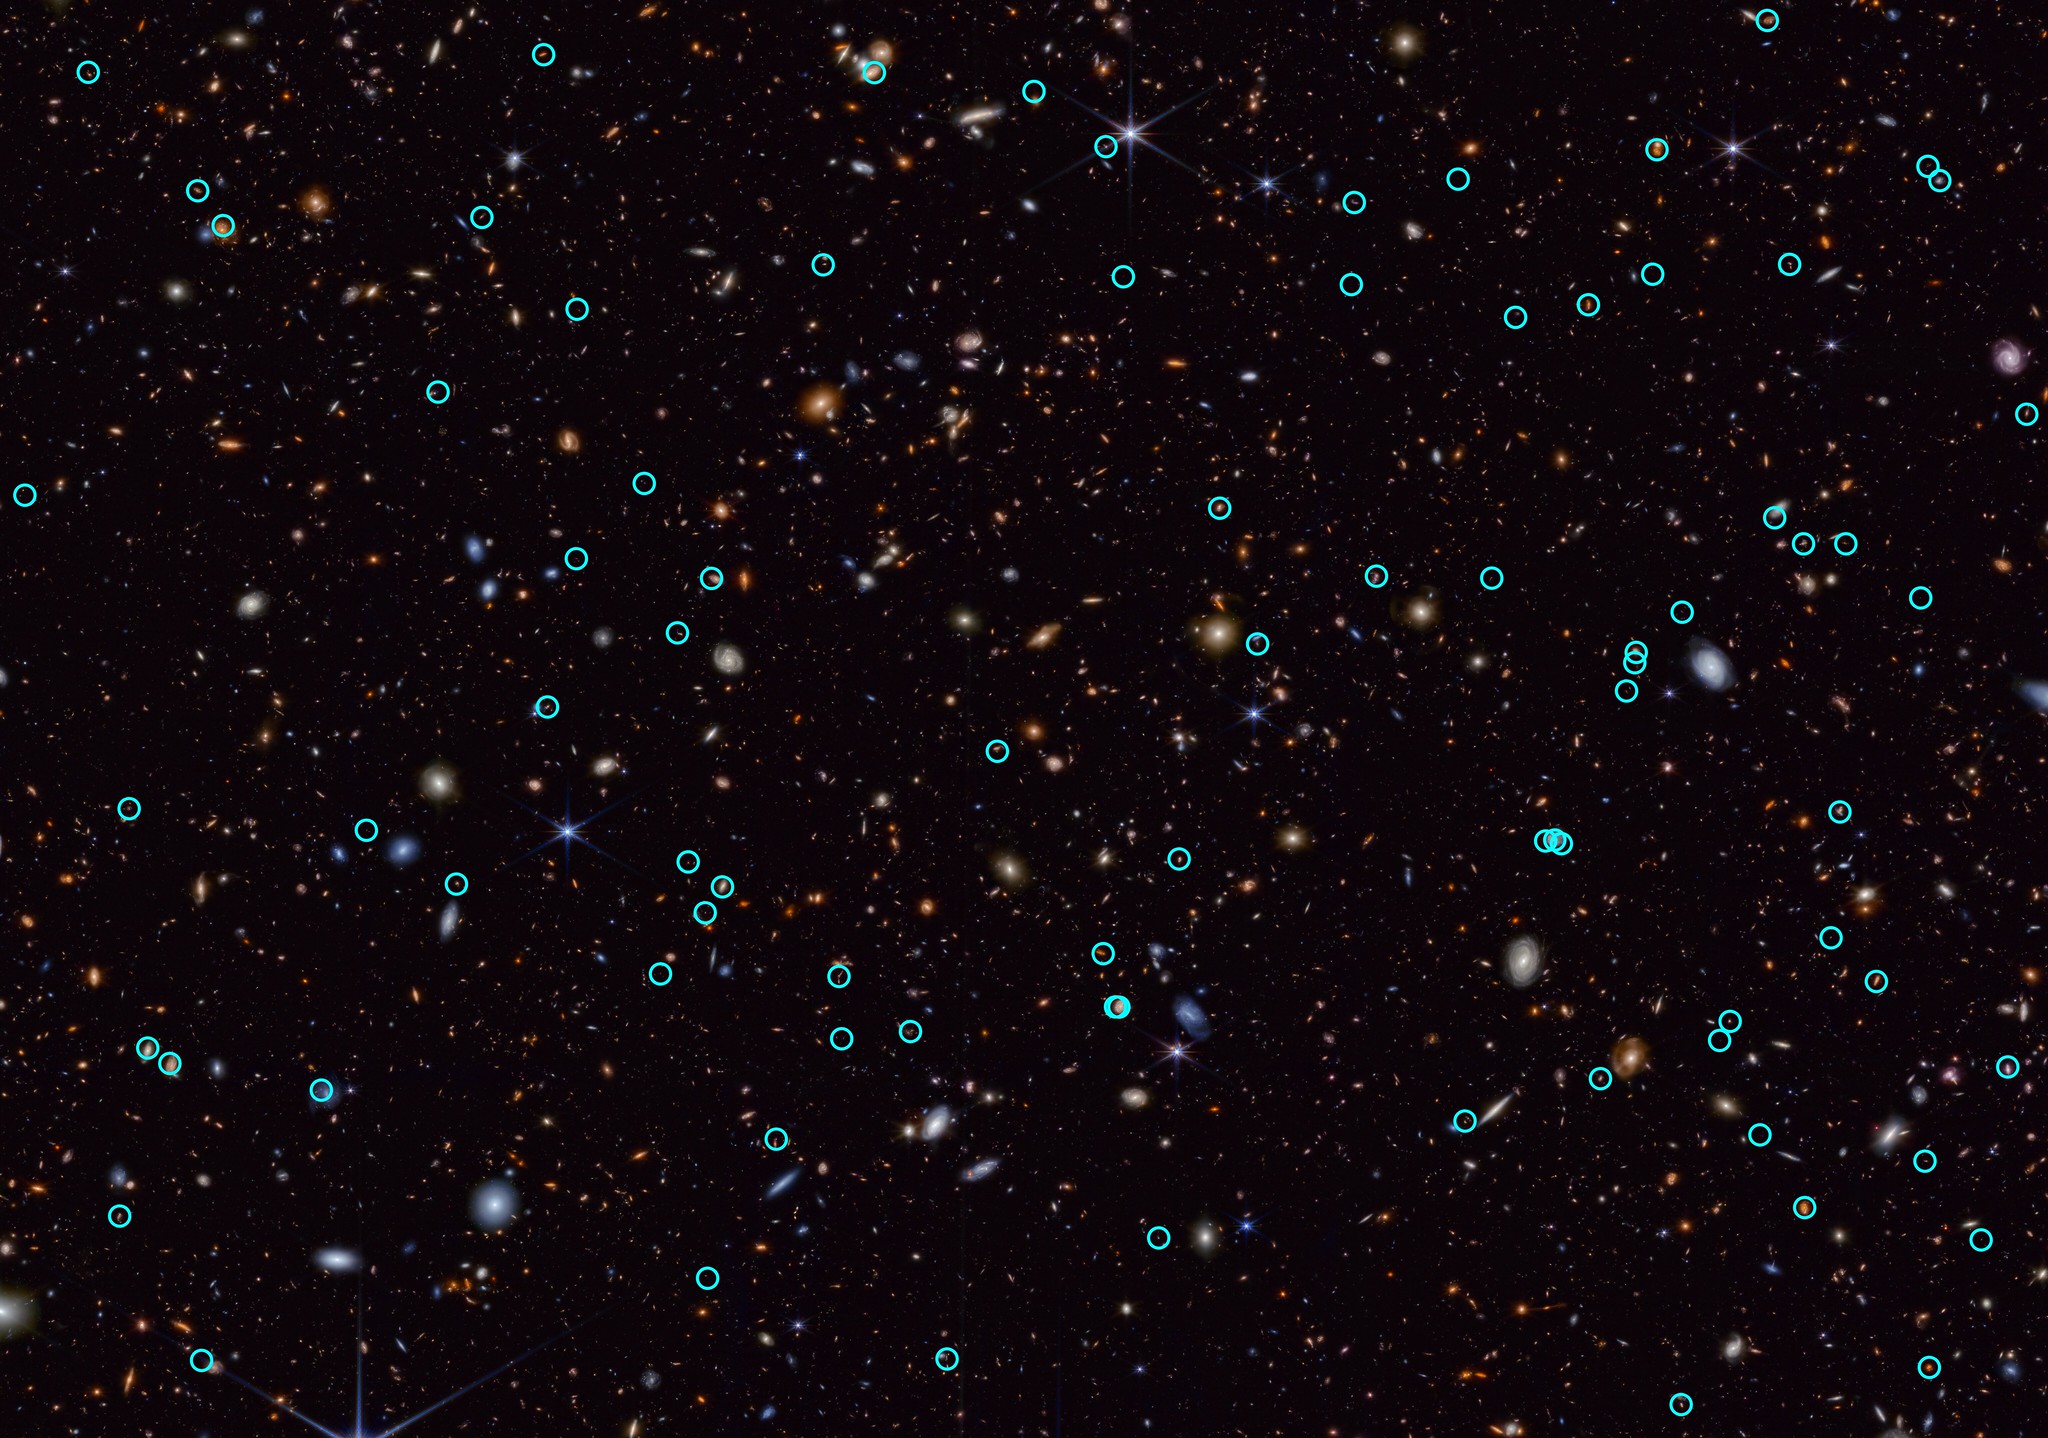 Space telescope image showing hundreds of objects of different colors, shapes, and sizes scattered across the black background of space. There are small red blobs; larger, fuzzy white or blueish ball-shaped masses with bright centers; white, pink, or blue disc shapes; clear spiral structures; and barely discernible specs. Eighty-three of the smaller objects in the image are circled in green. Some of the circles are close together; some are far apart; some overlap. There is no apparent pattern in the distribution.